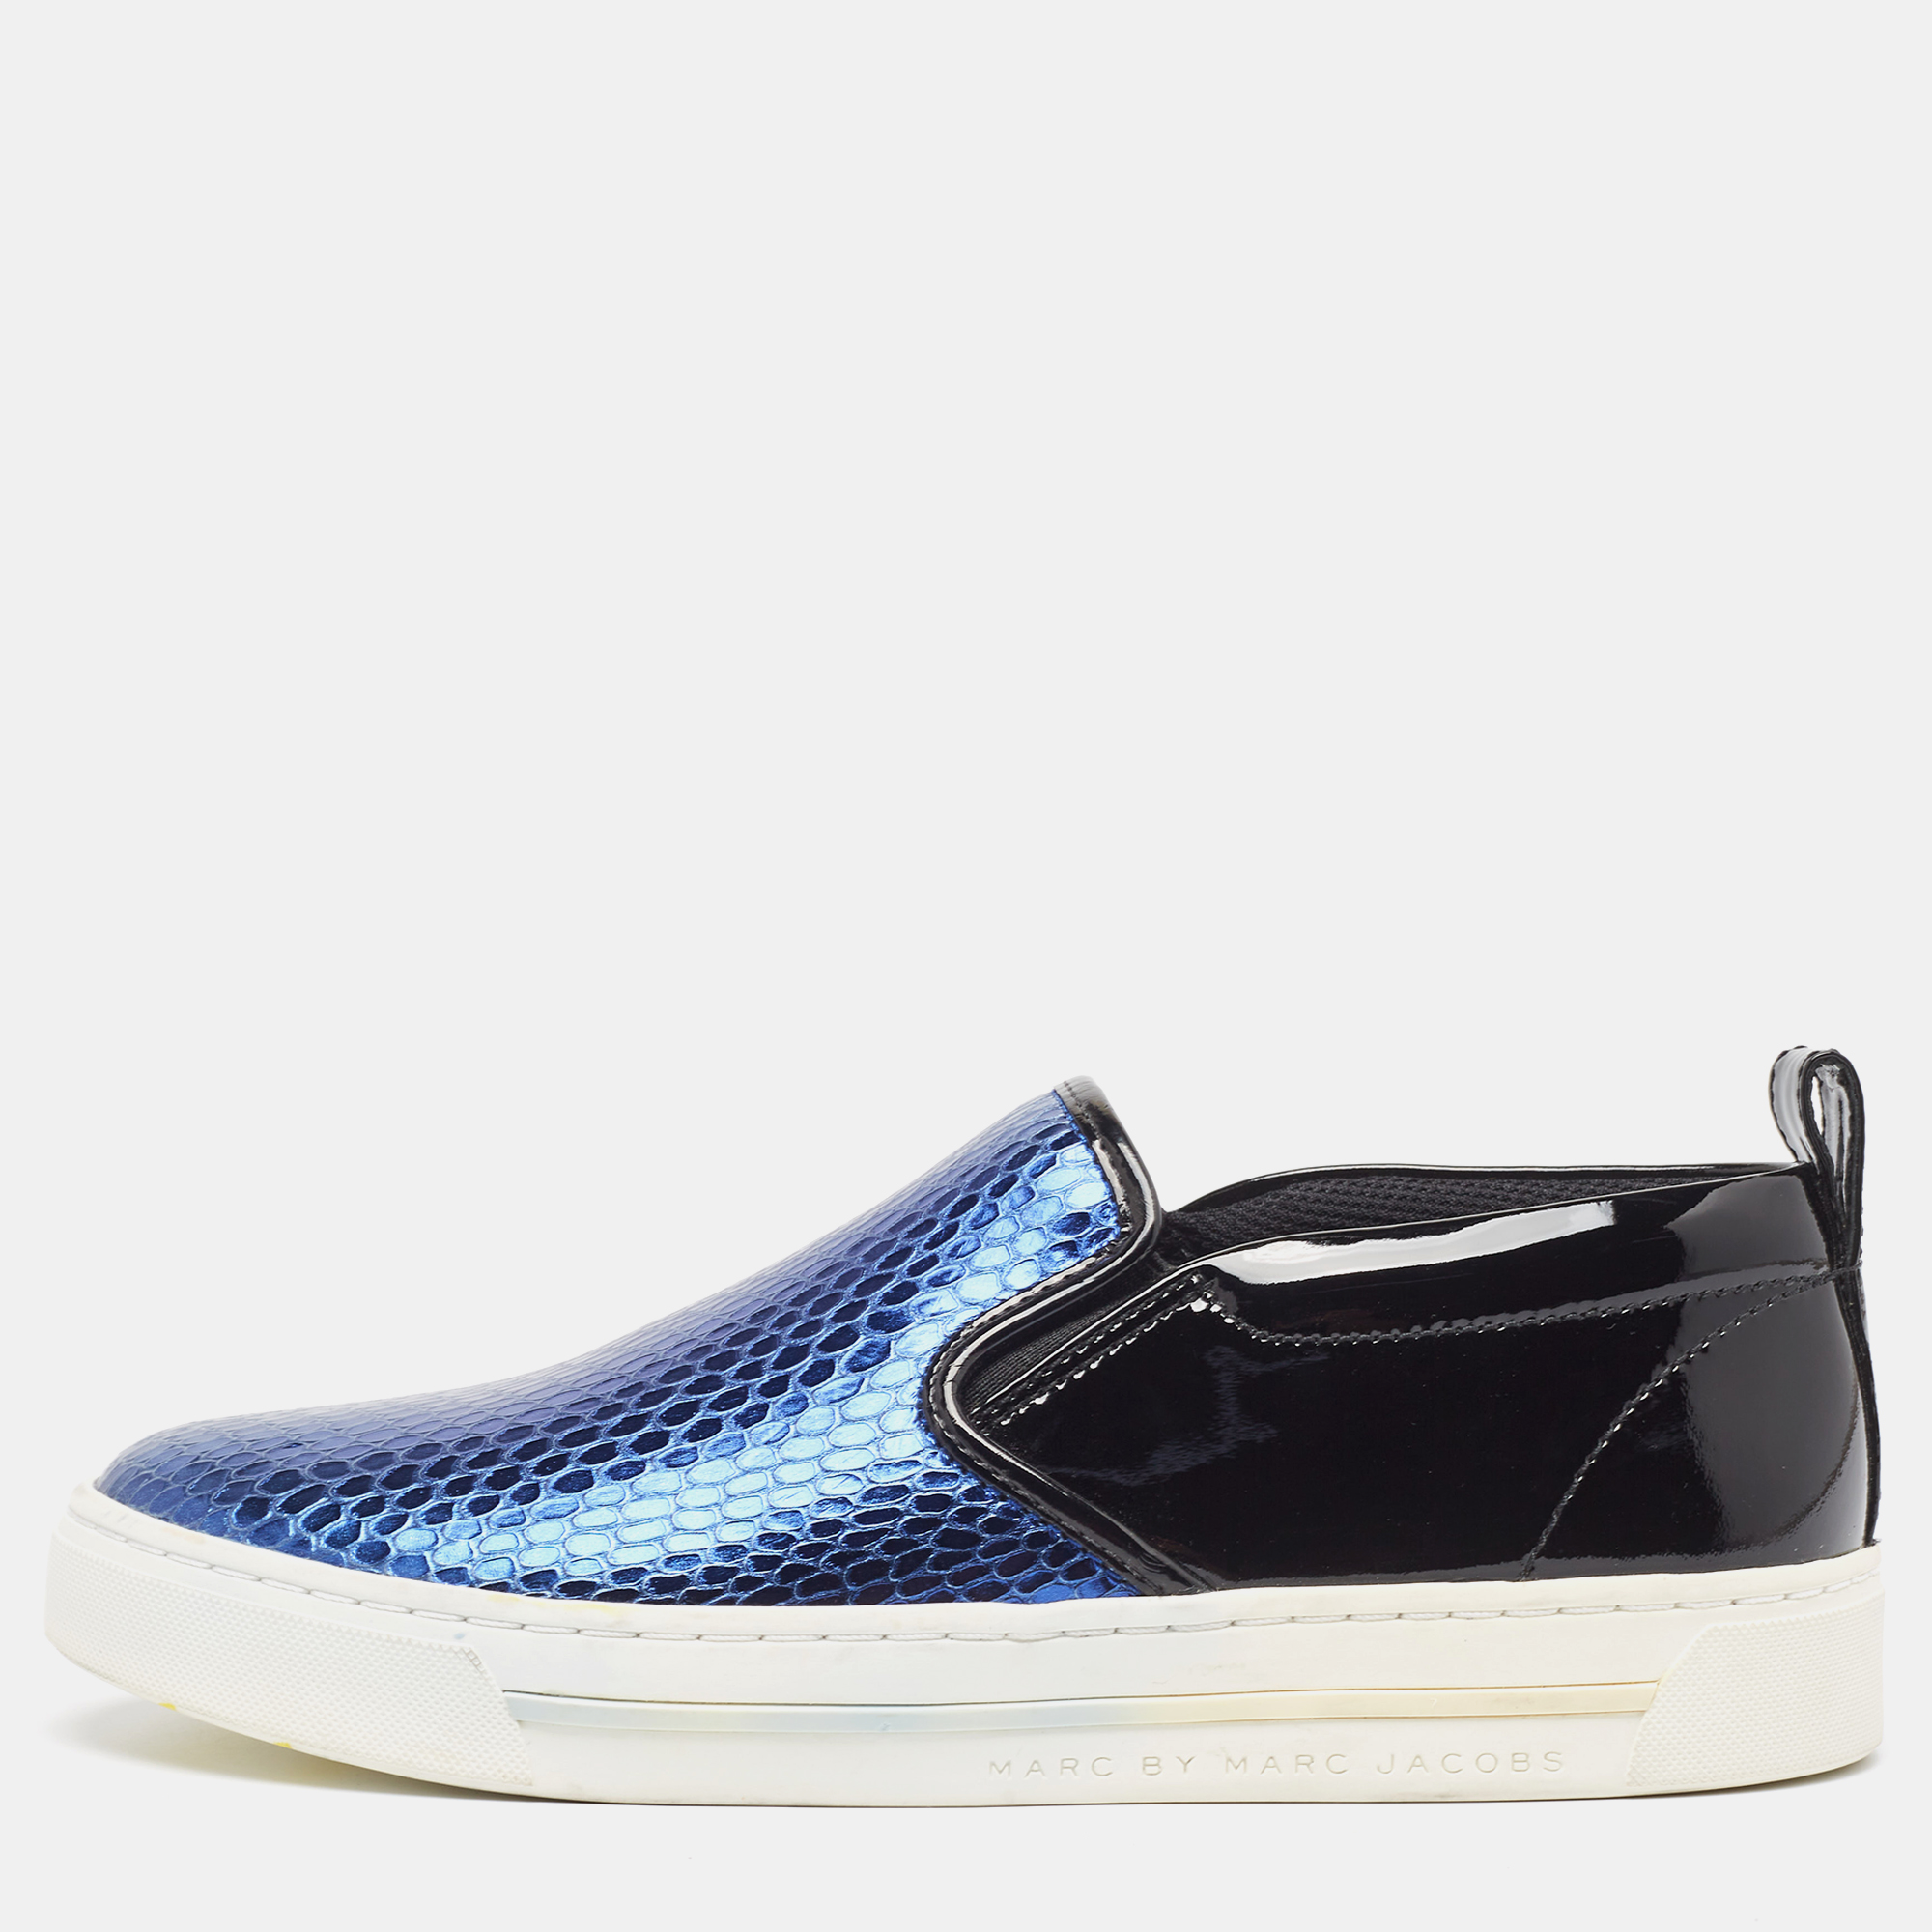 Coming in a classic silhouette these Marc by Marc Jacobs Broome sneakers are a seamless combination of luxury comfort and style. These sneakers are finished with signature details and comfortable insoles.